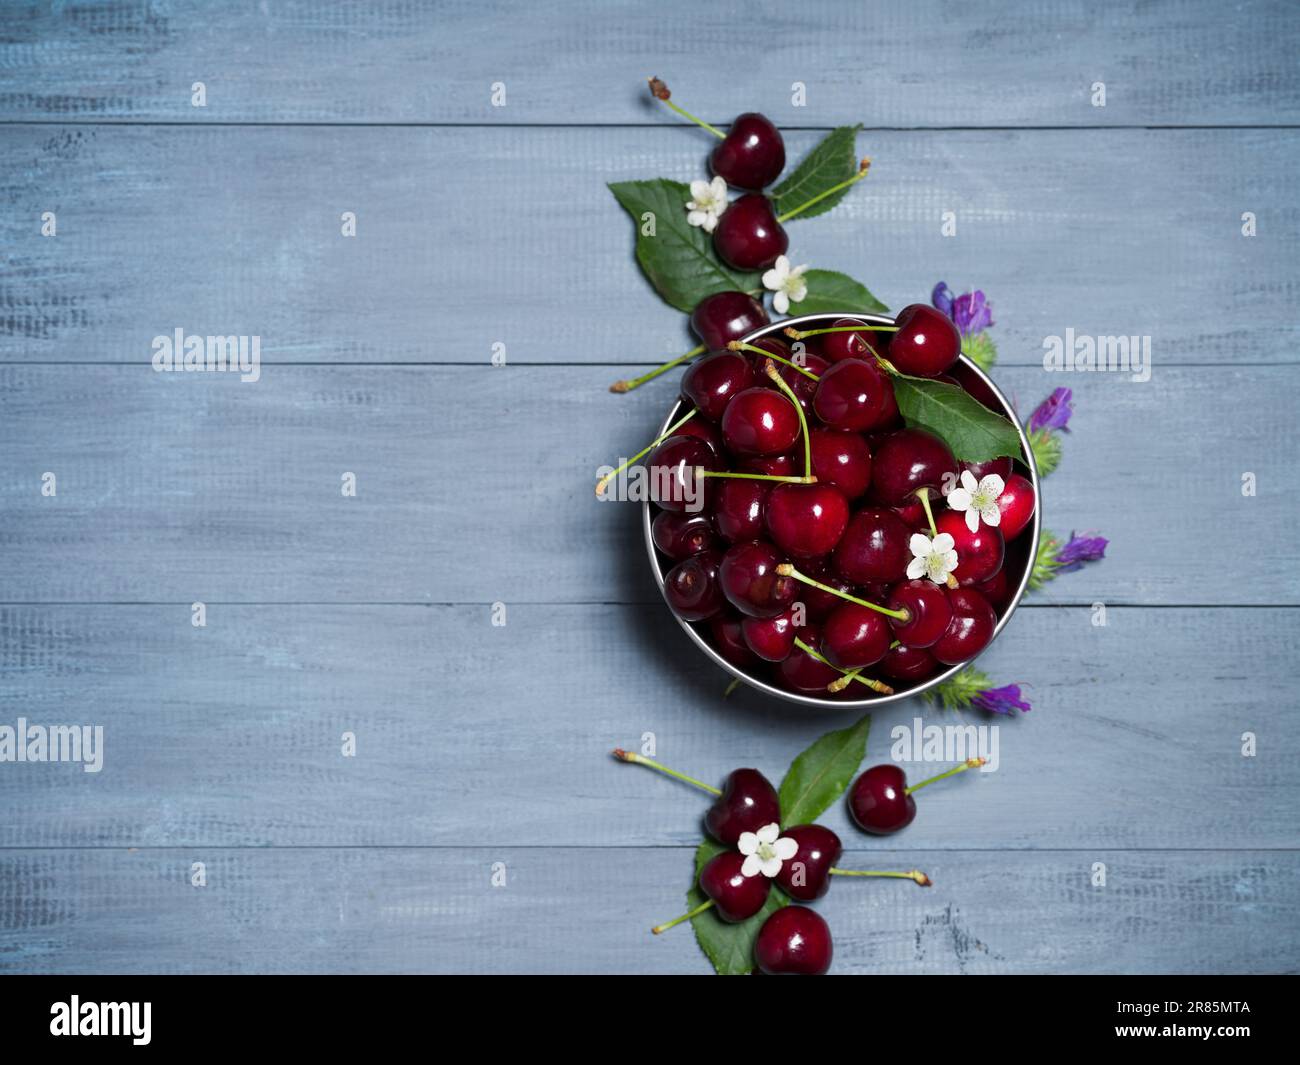 Fresh cherries in a bowl on rustic textured table. Red summer fruits concept Stock Photo